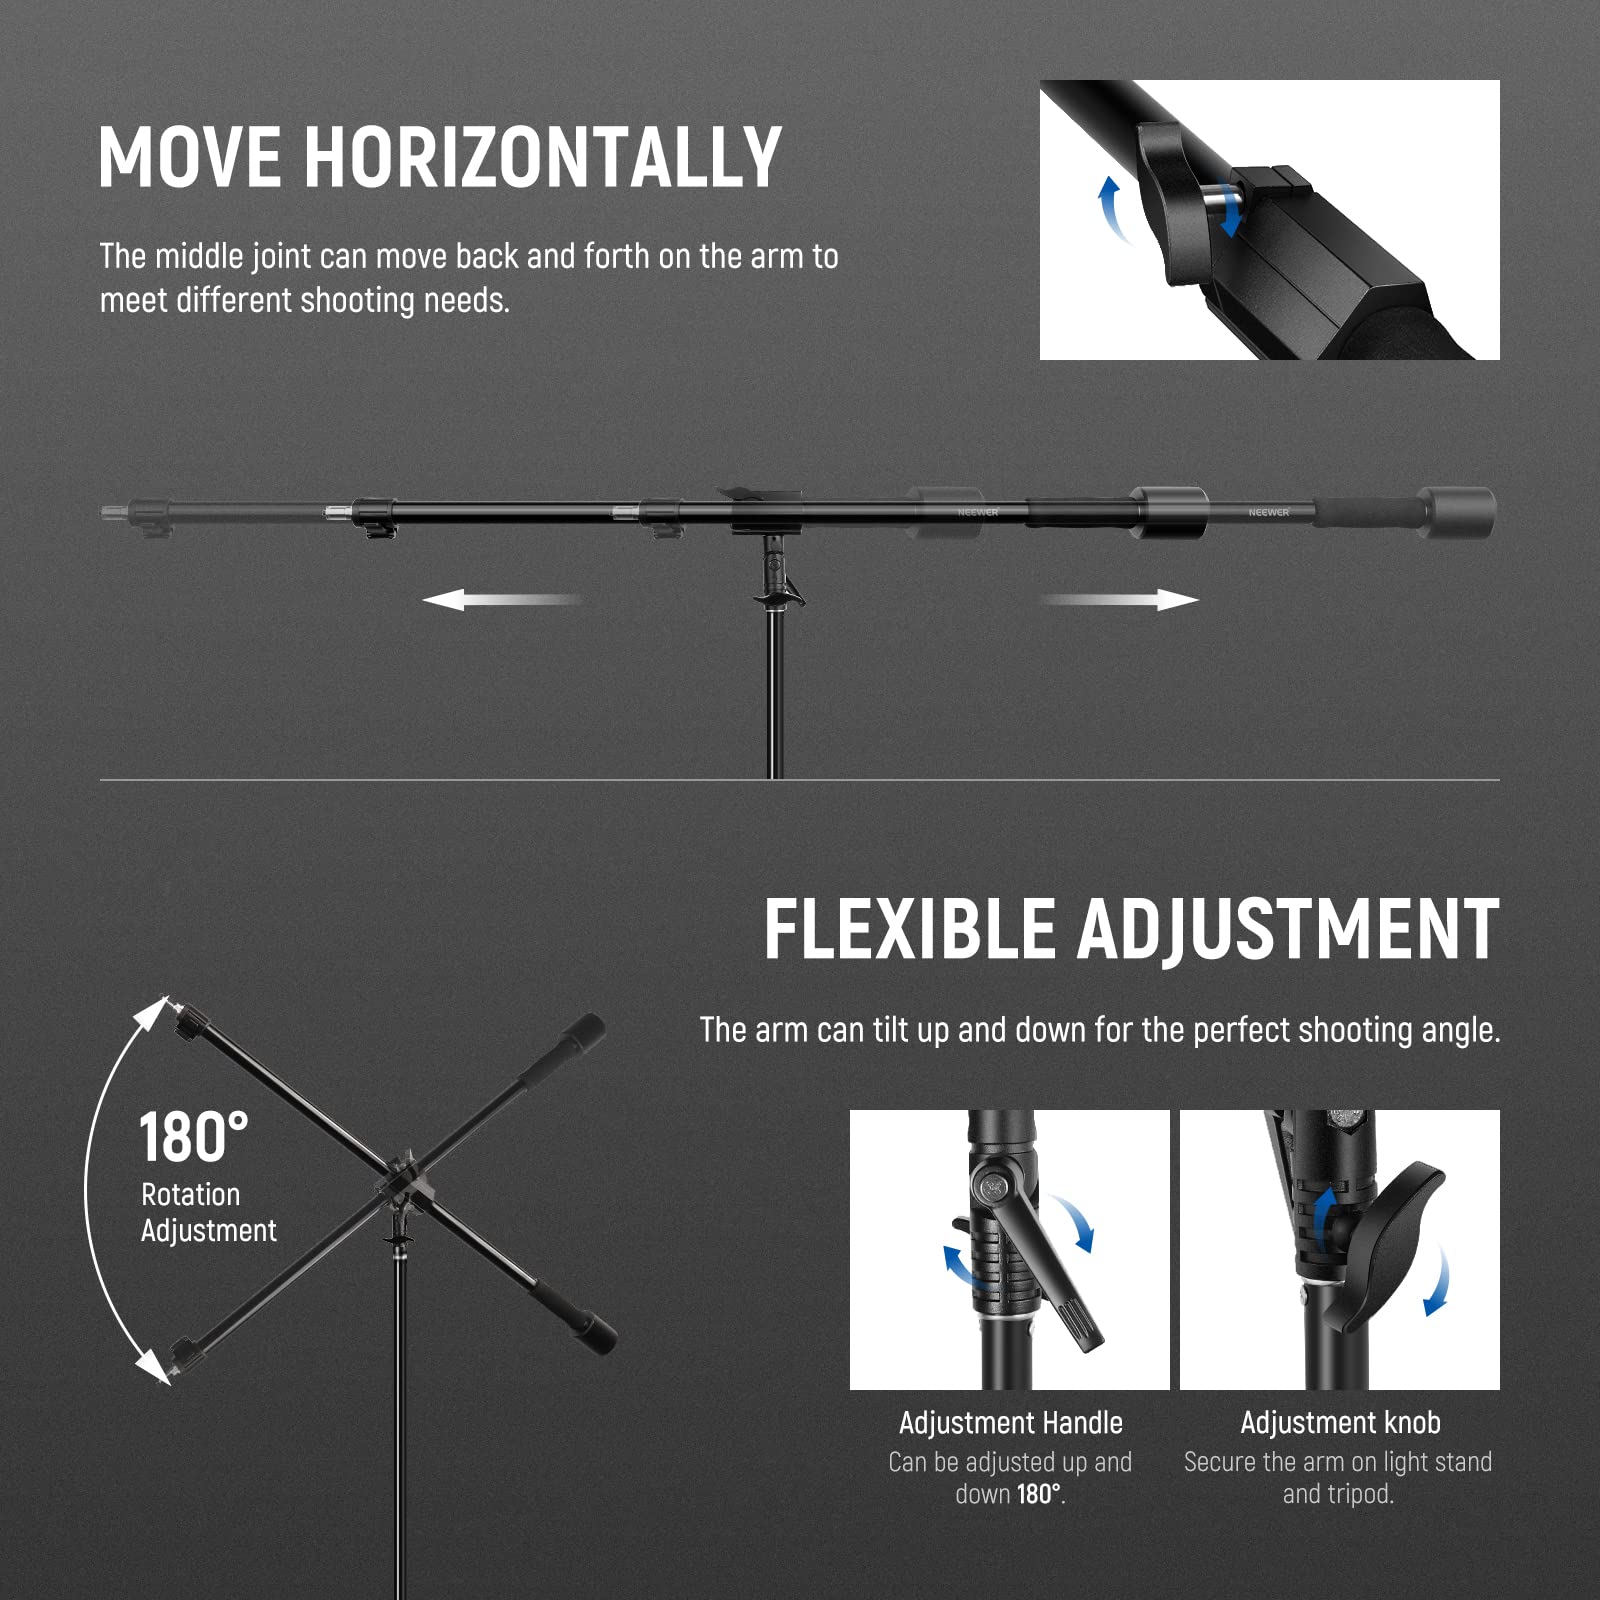 NEEWER Tripod Boom Arm, 35" to 61" (89 to 155cm) with 1.5kg Counterweight and Sandbag, 1/4" Screw Compatible with Softbox, Studio Light, Flash, Umbrella, Ring Light, Max Load 5kg